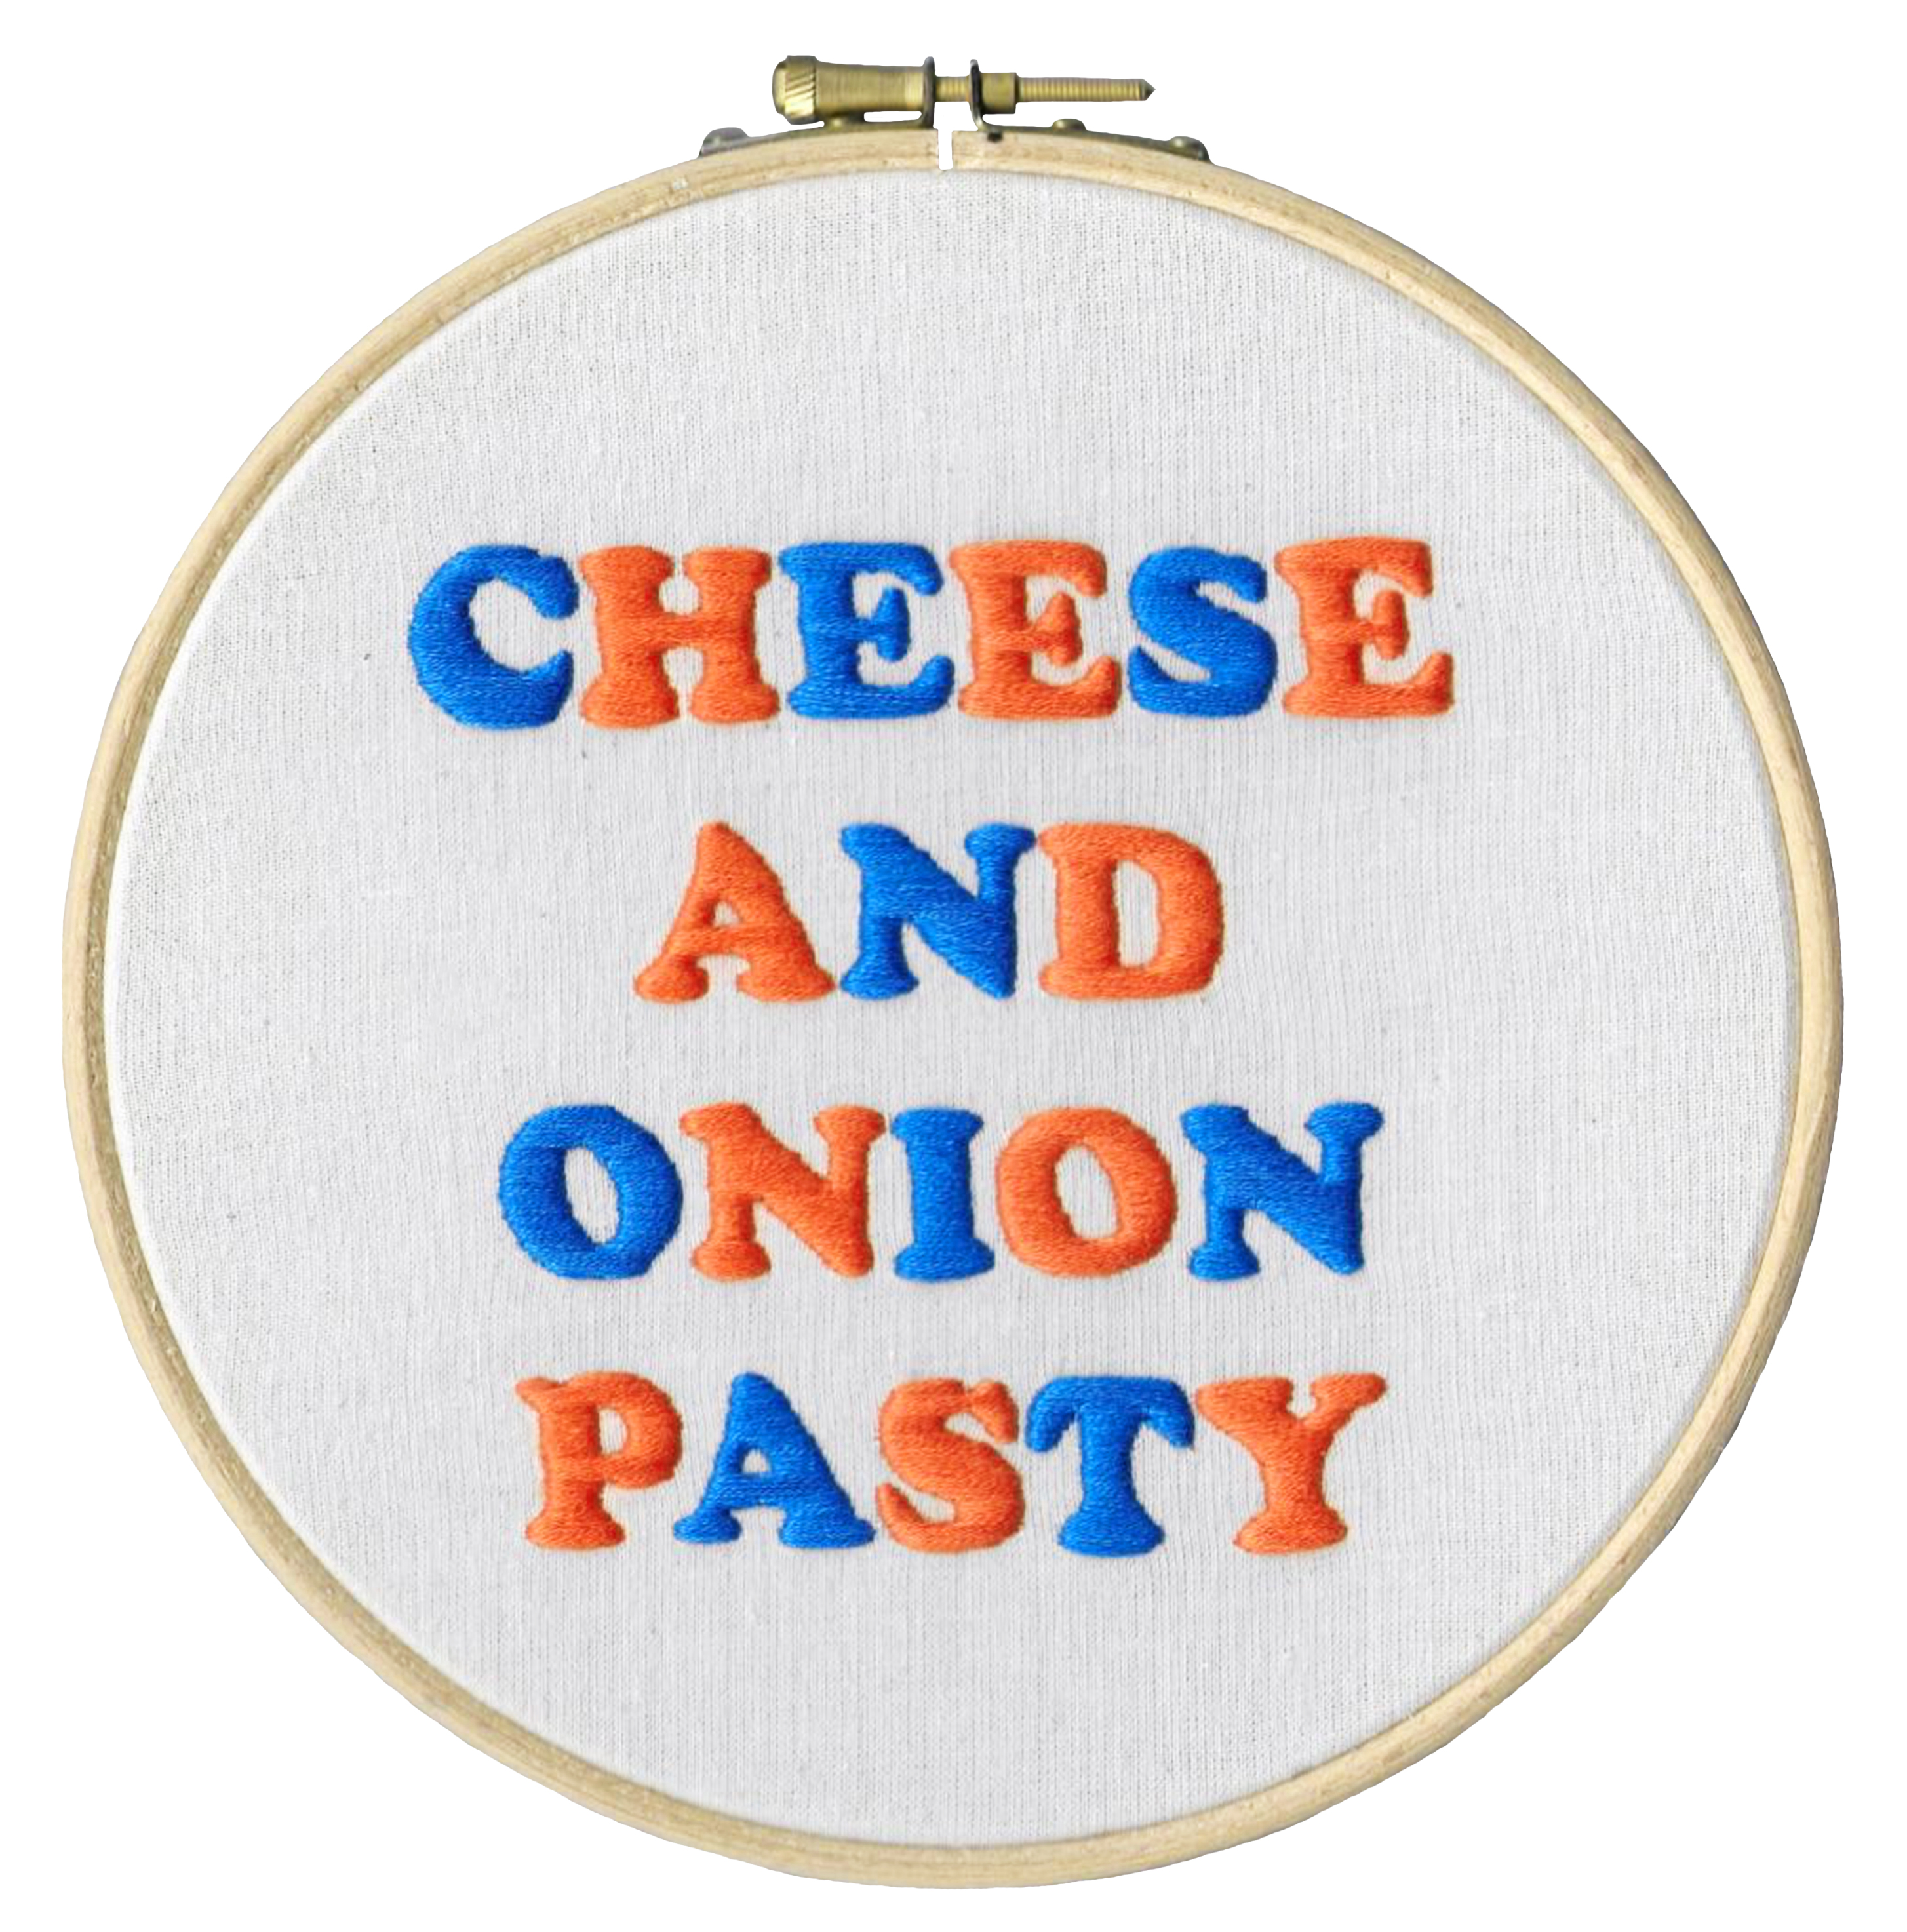 The words "Cheese and Onion Pasty" embroidered